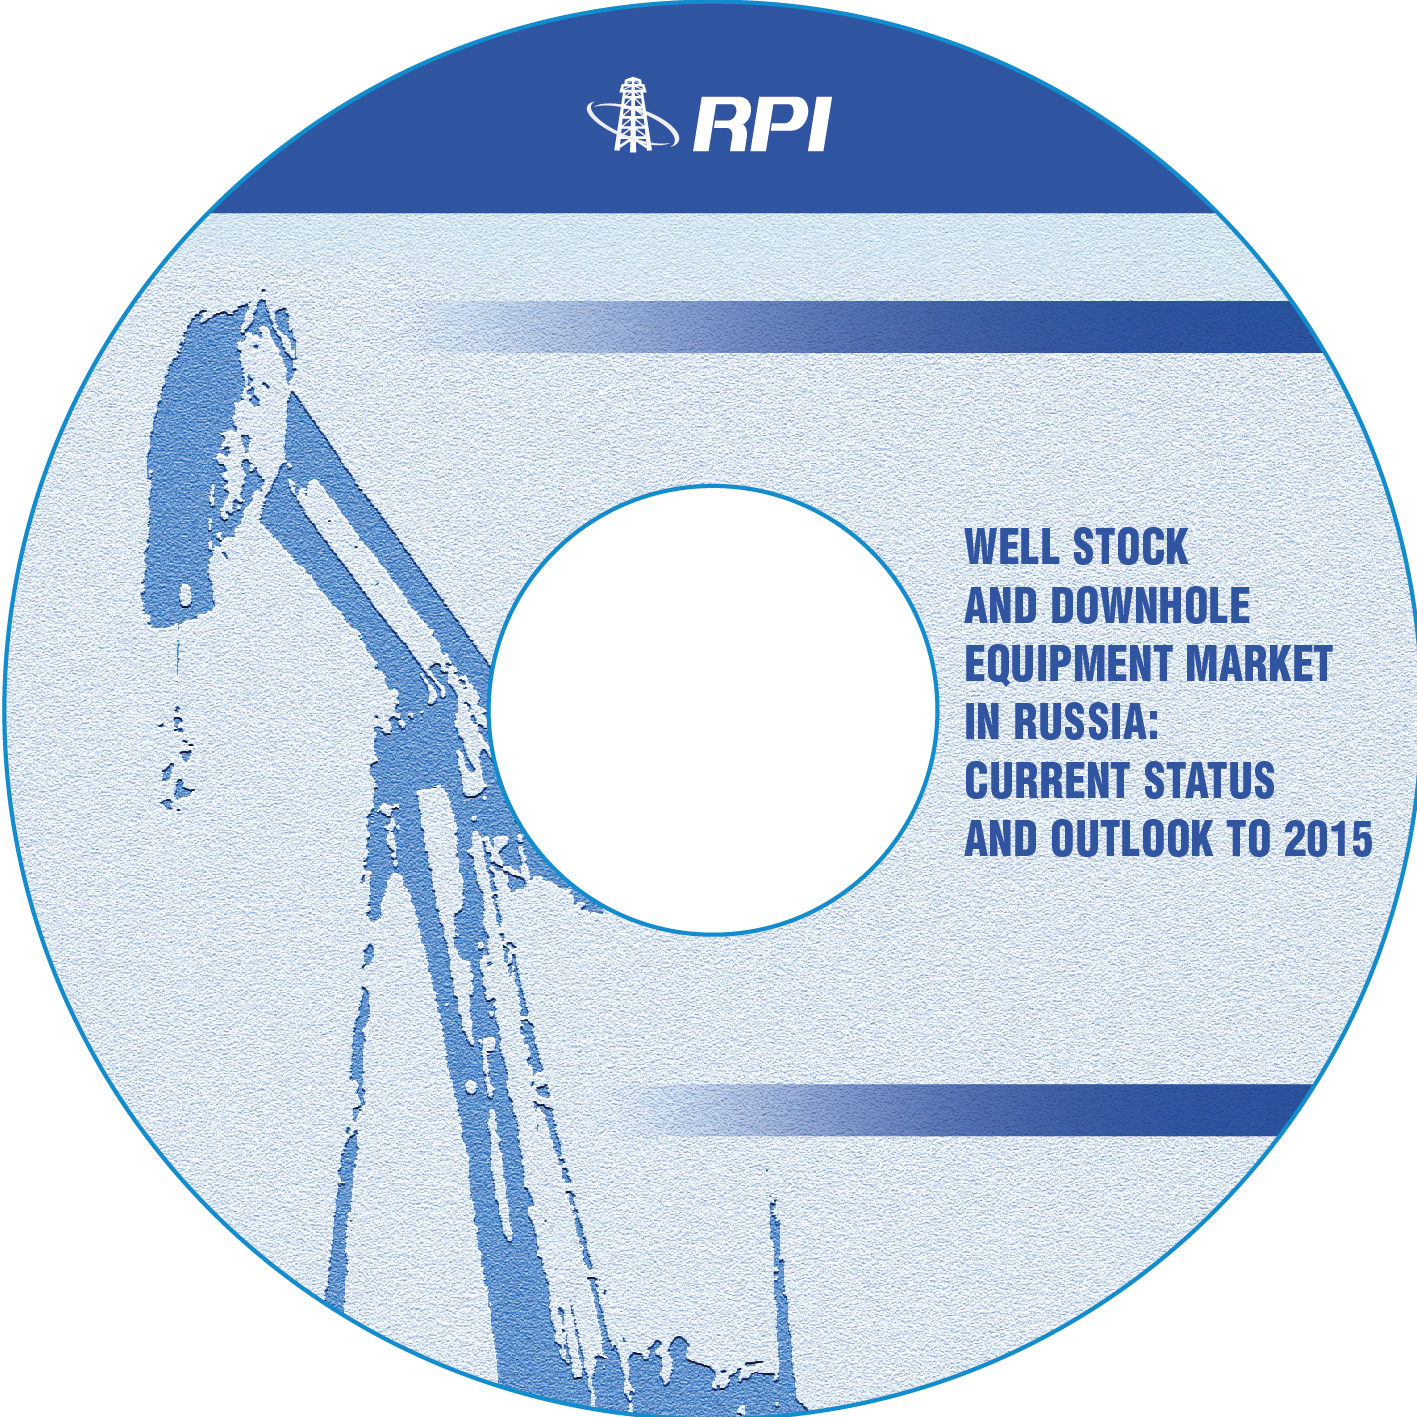 Well stock and downhole equipment market in Russia: Current status and outlook to 2015